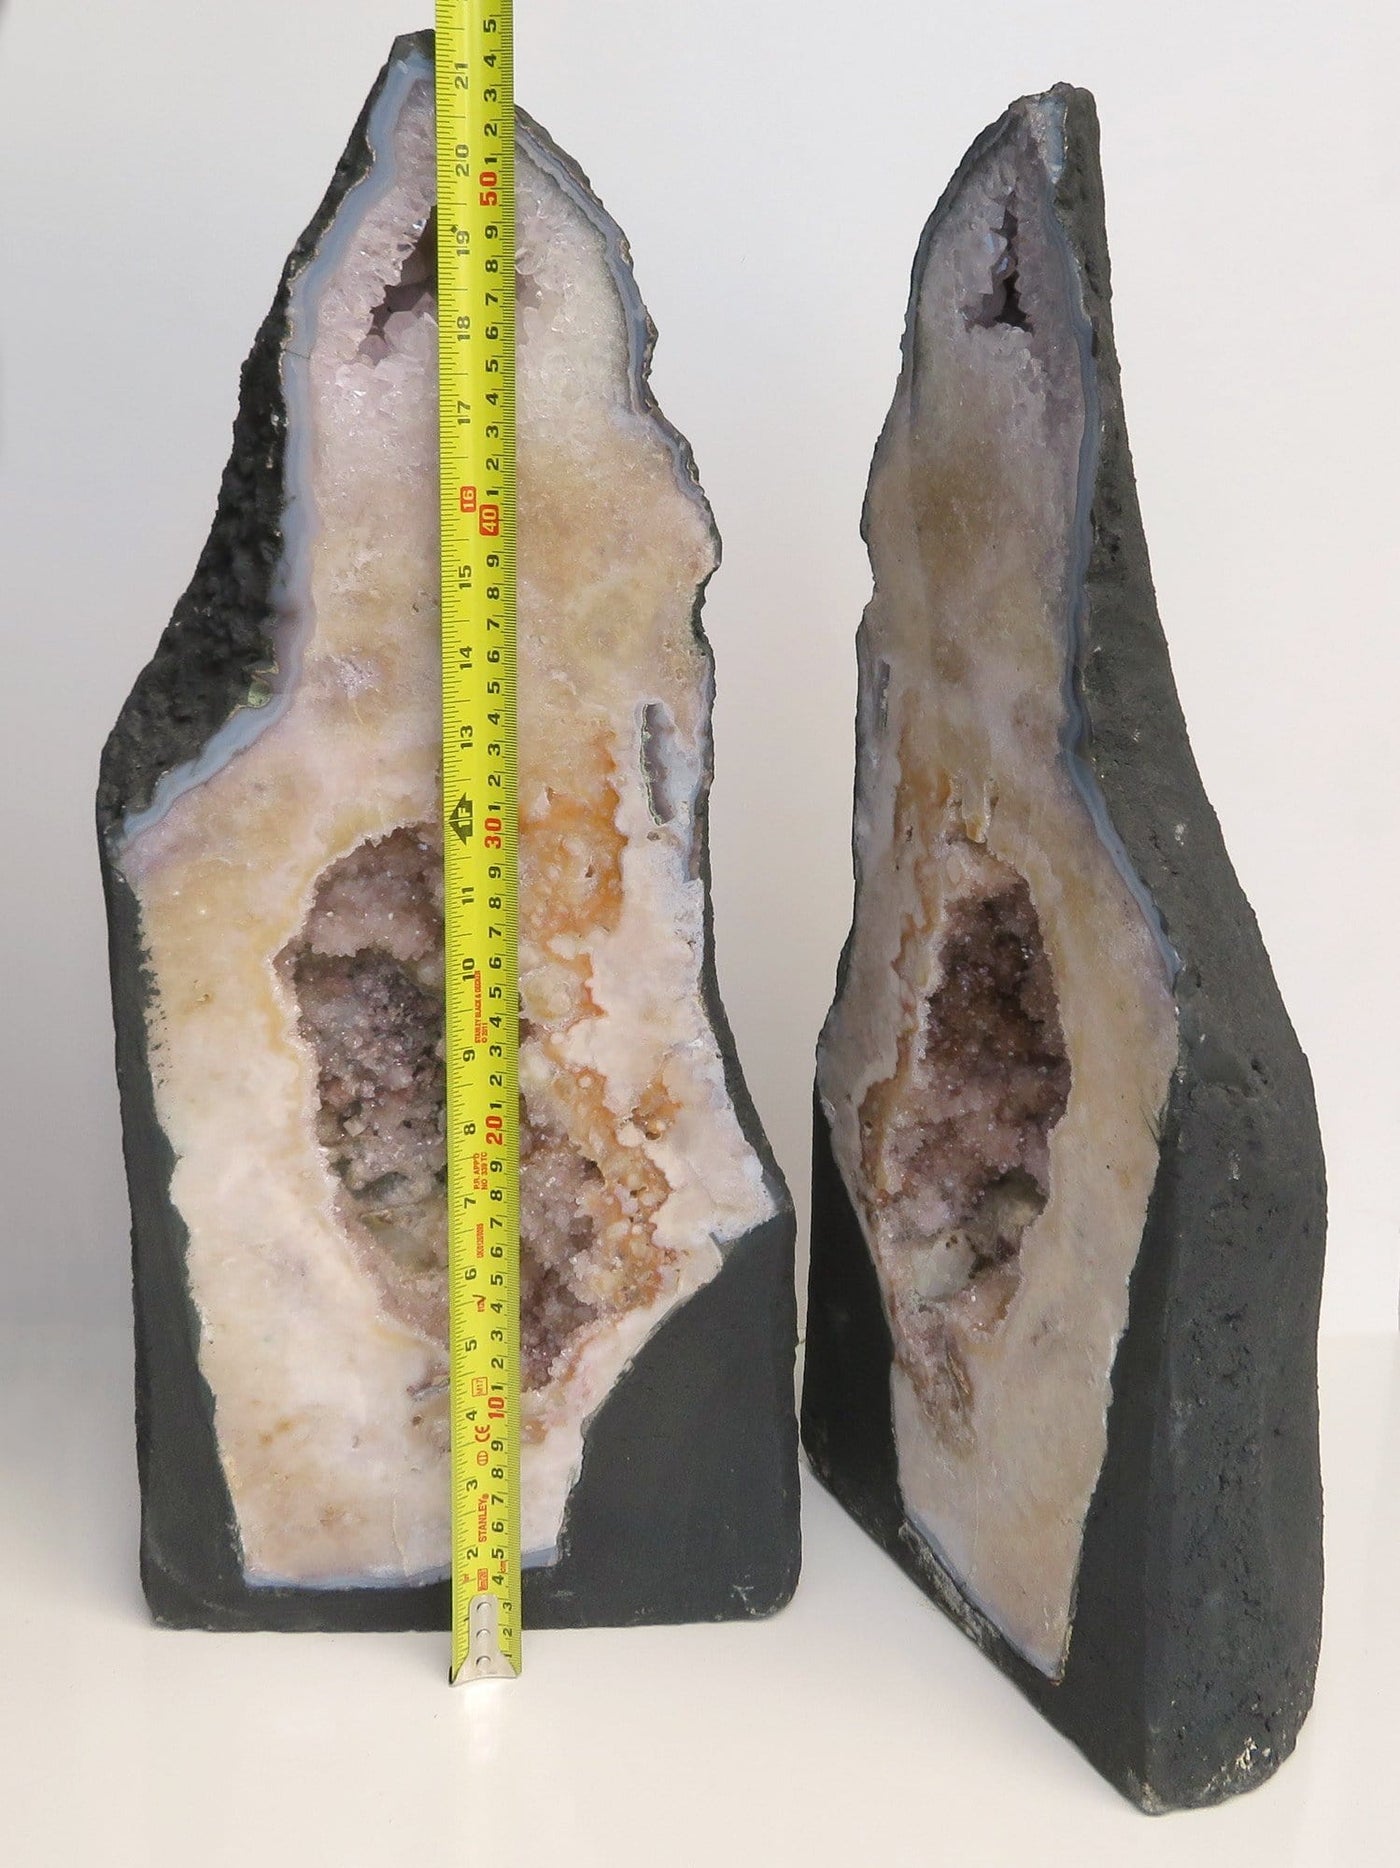 Pink Amethyst Cluster Geode Slice Pair with a ruler showing 21.5" tall